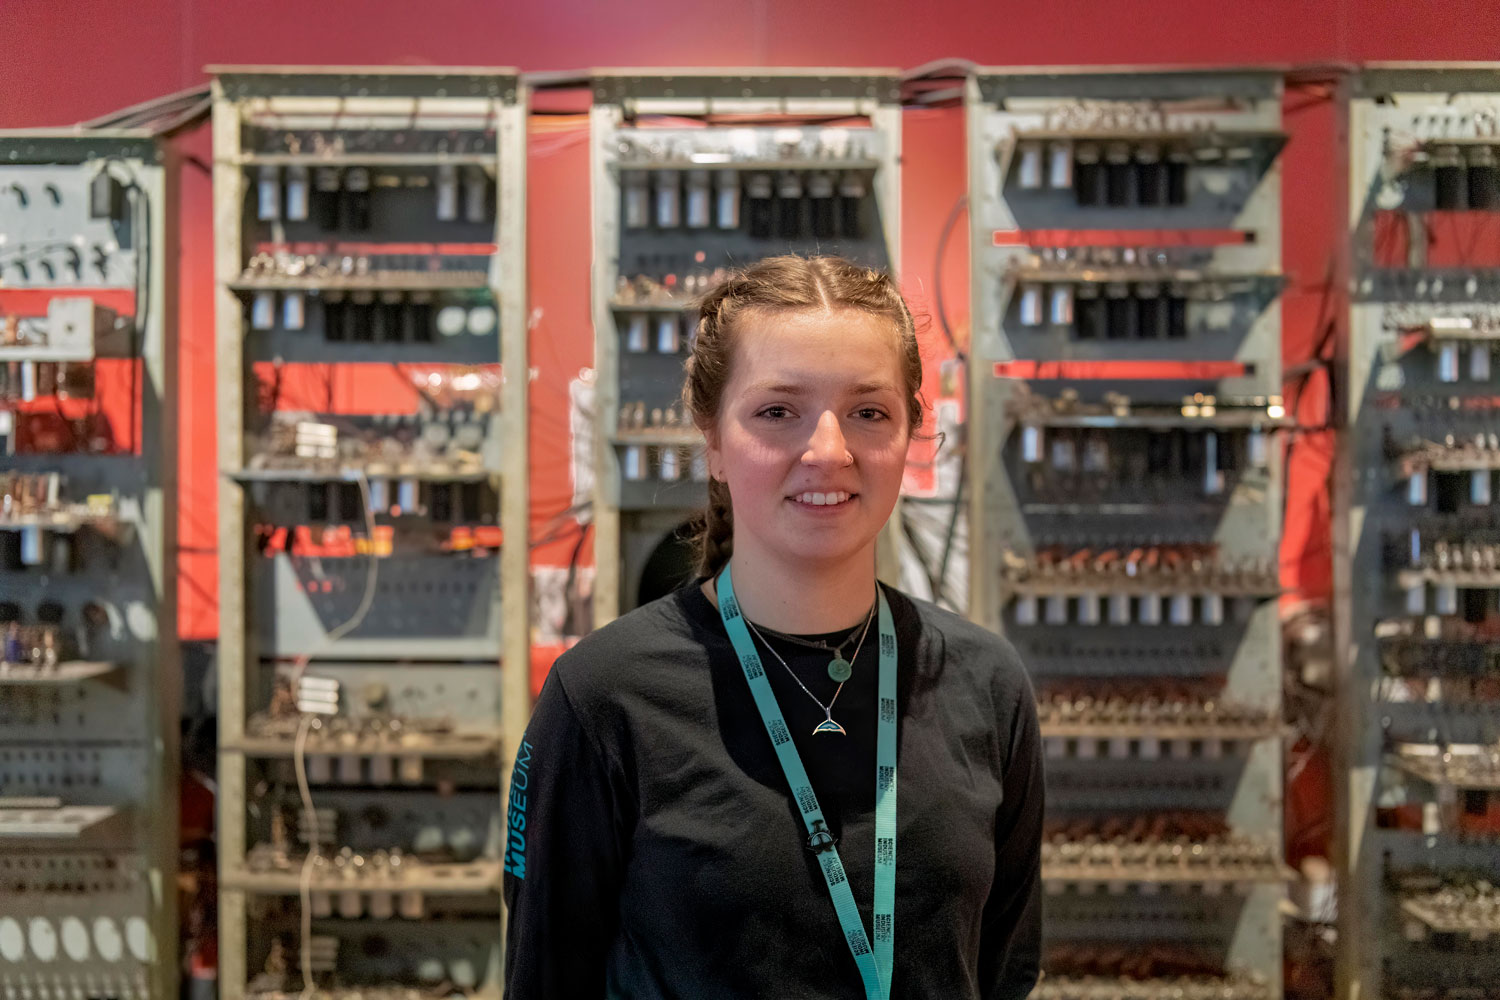 A young woman in a museum uniform stood in front of an early computer.